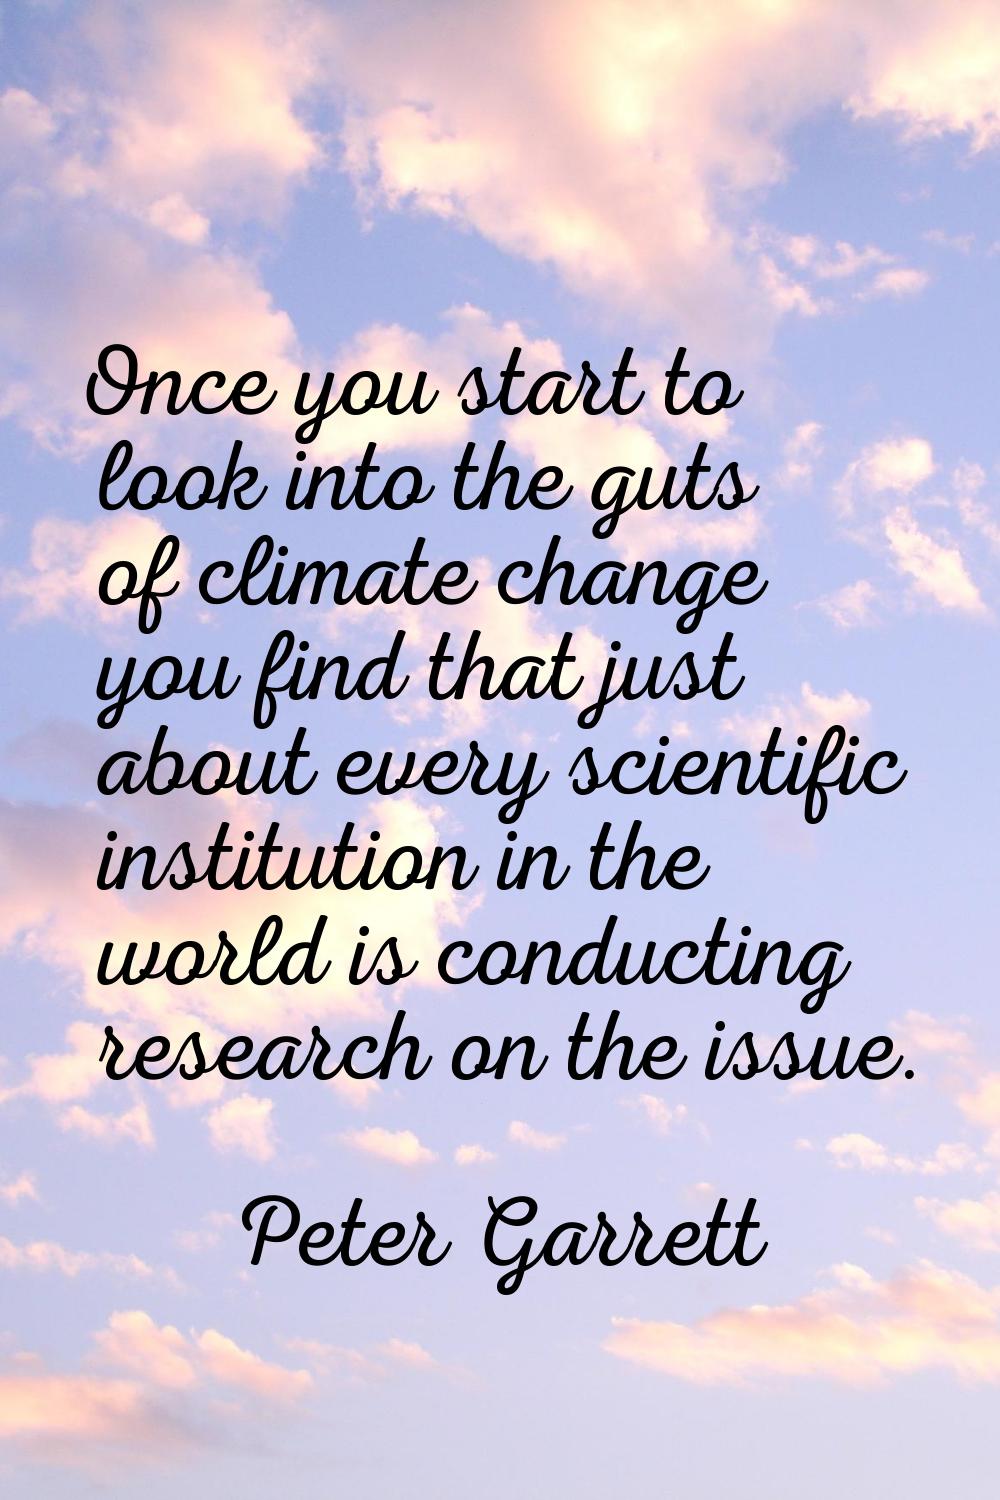 Once you start to look into the guts of climate change you find that just about every scientific in